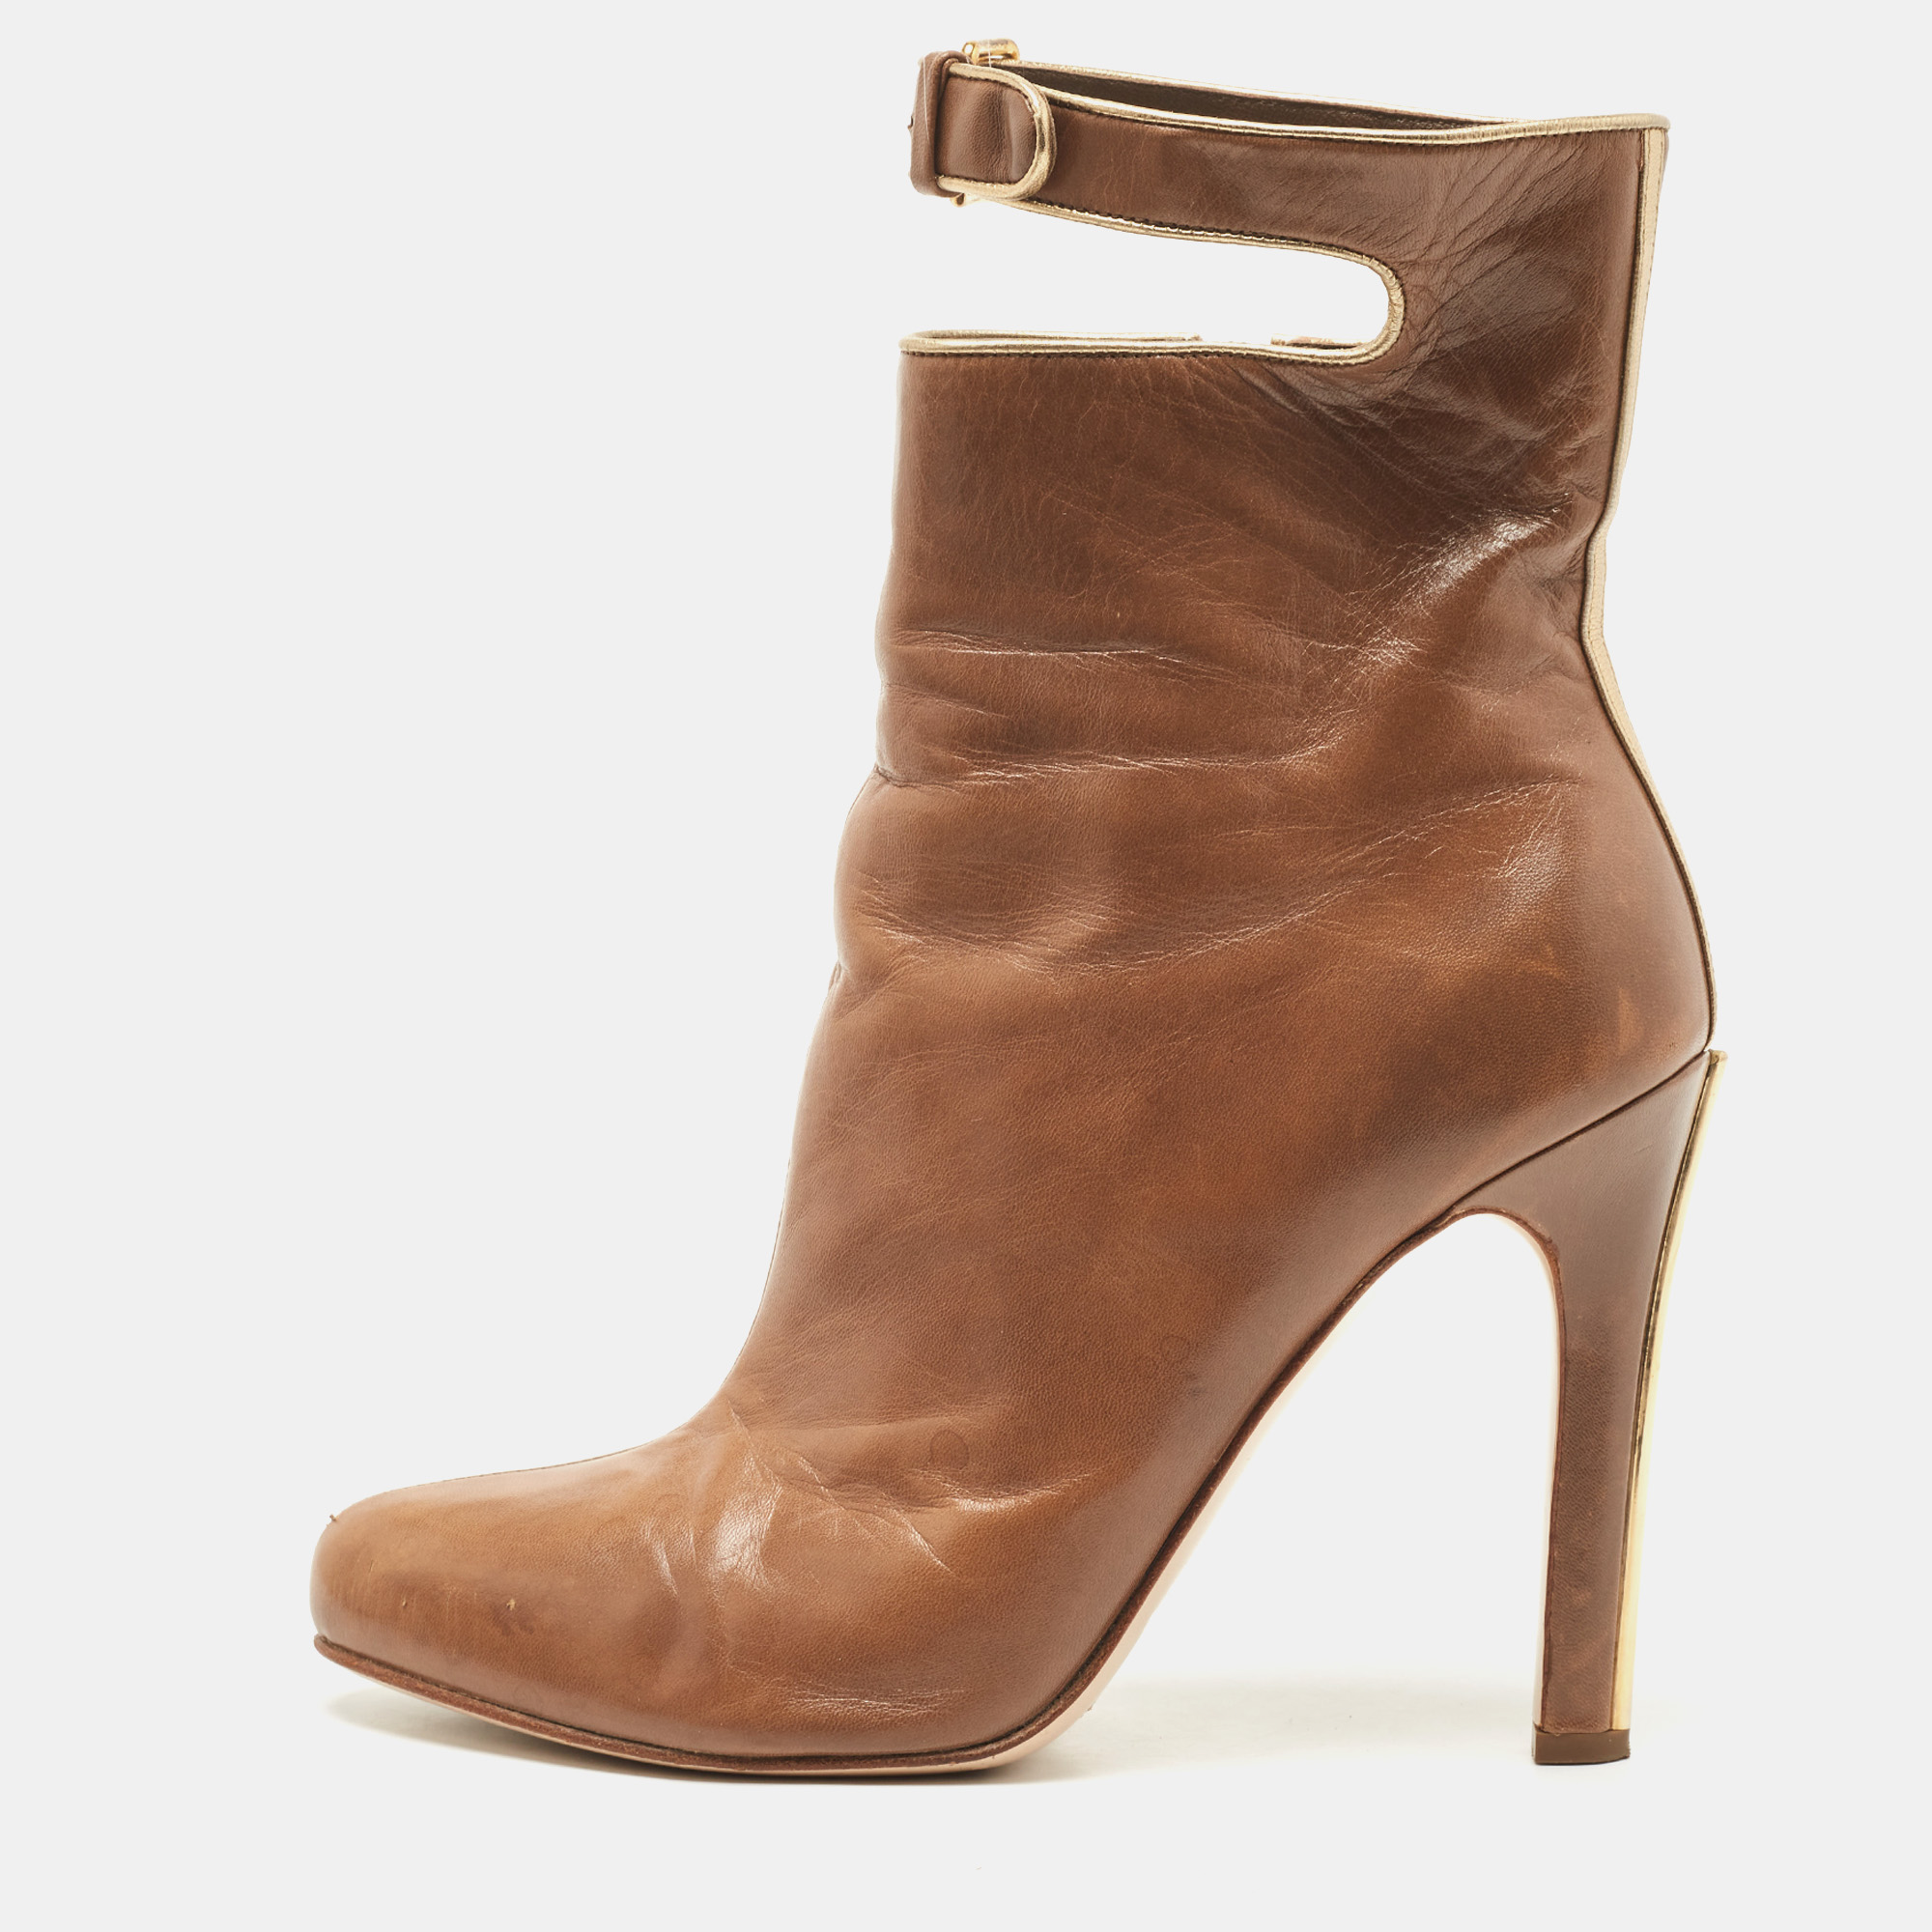 Miu Miu Brown Leather Buckle Detail Ankle Booties Size 39.5